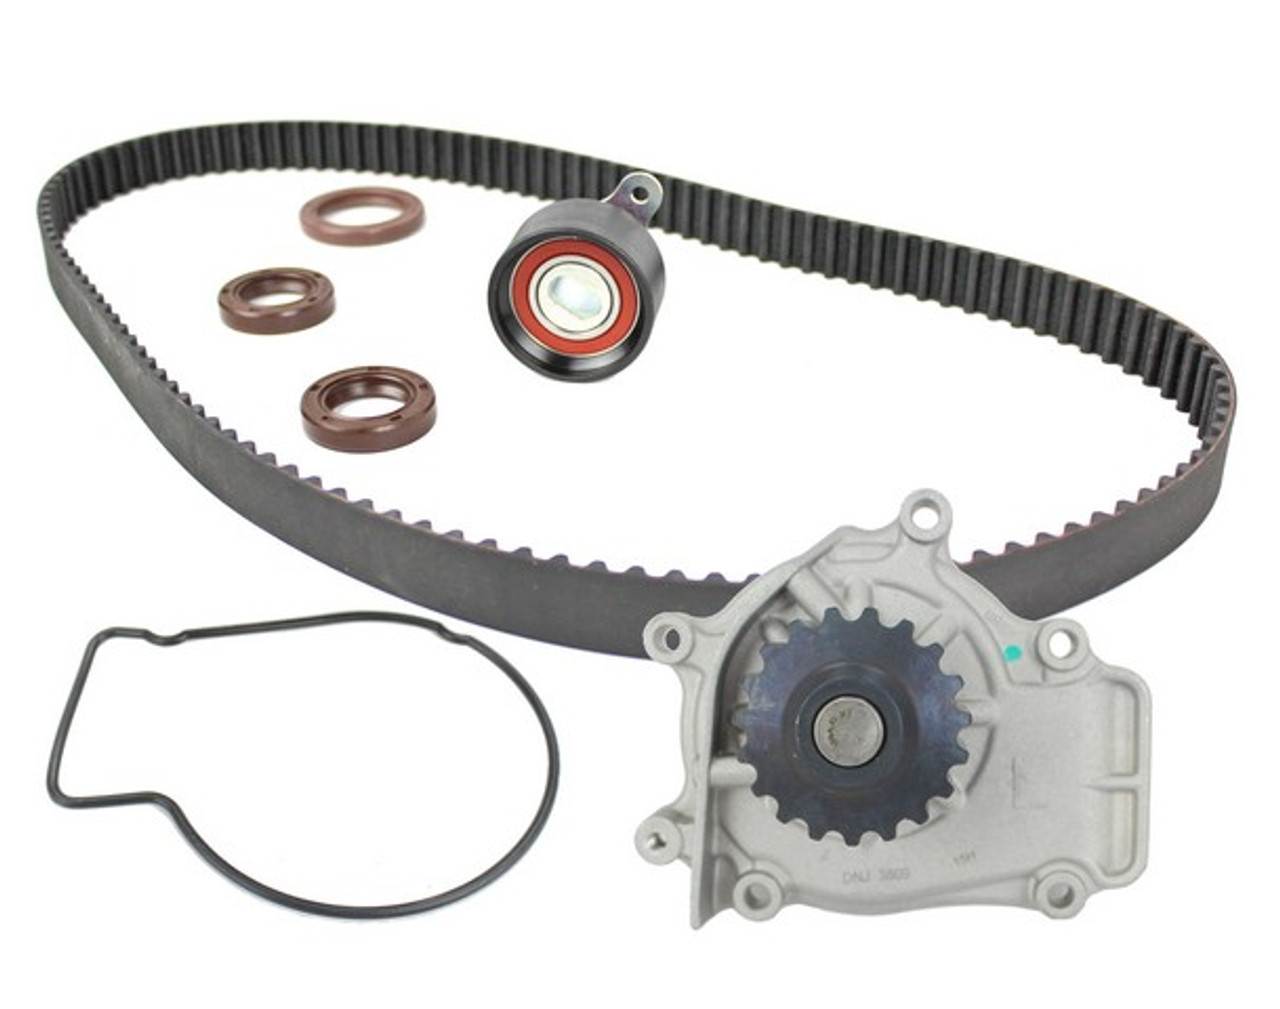 1990 Honda Prelude 2.1L Timing Belt Kit with Water Pump TBK209WP.E3